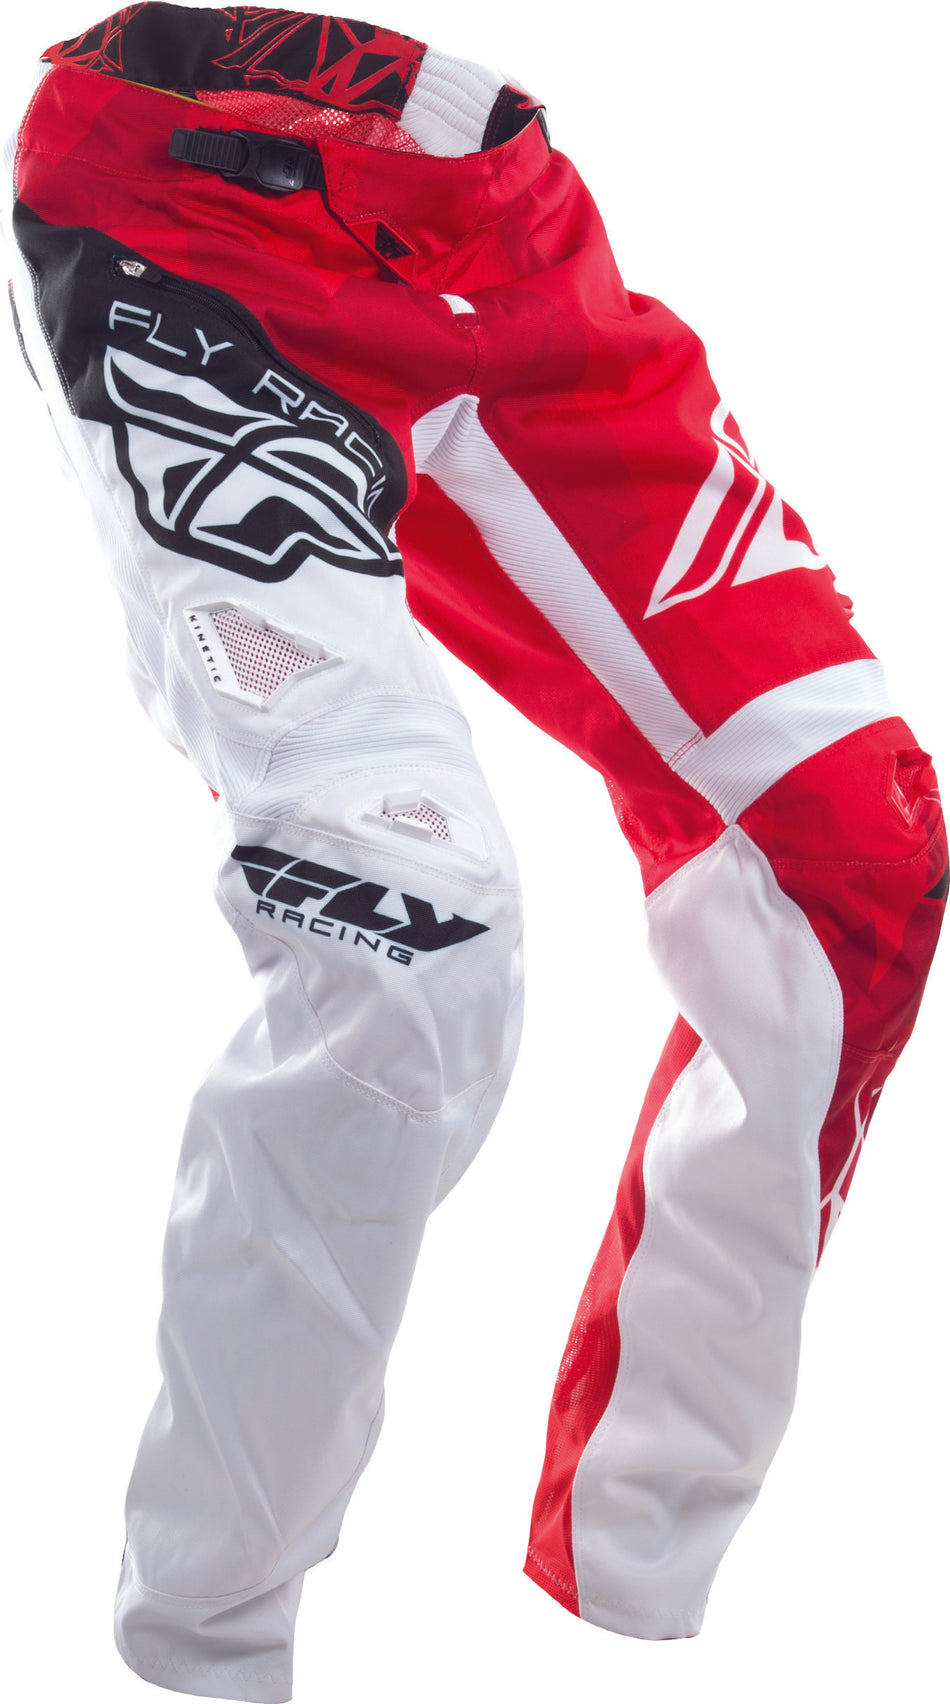 FLY RACING Bicycle Crux Pant Red/White Sz 34 370-02234